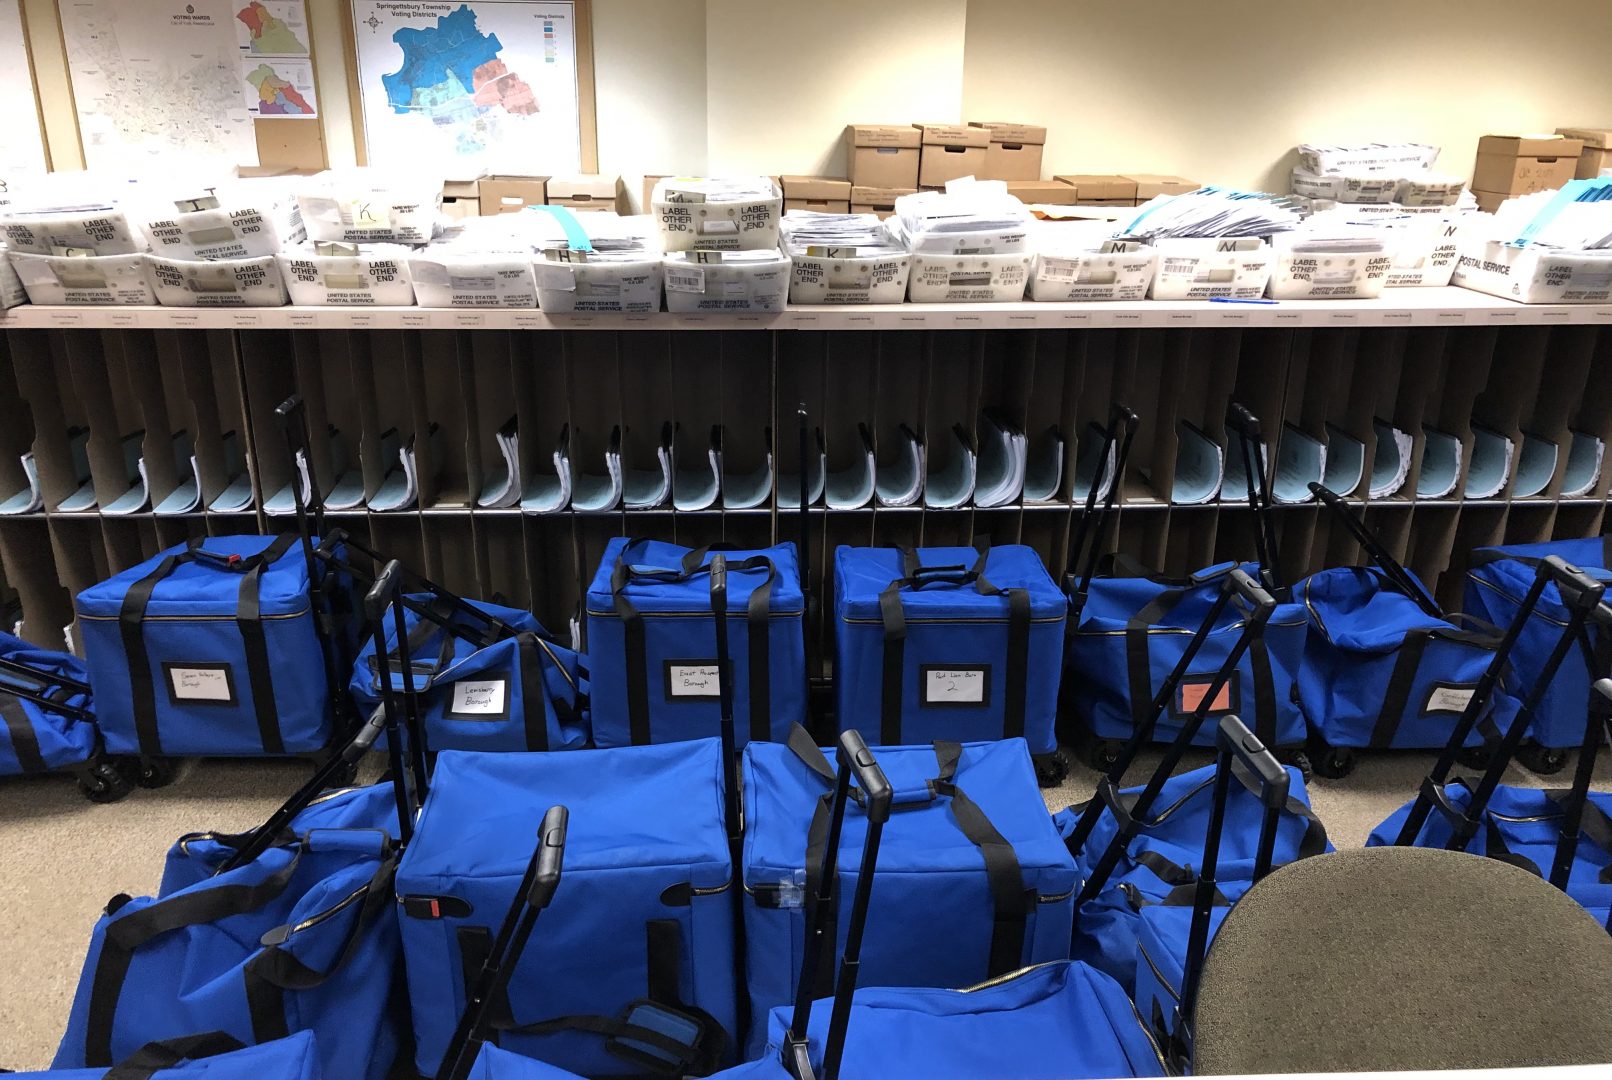 Bags for ballots sit in the York County elections office on Nov. 6, 2019.